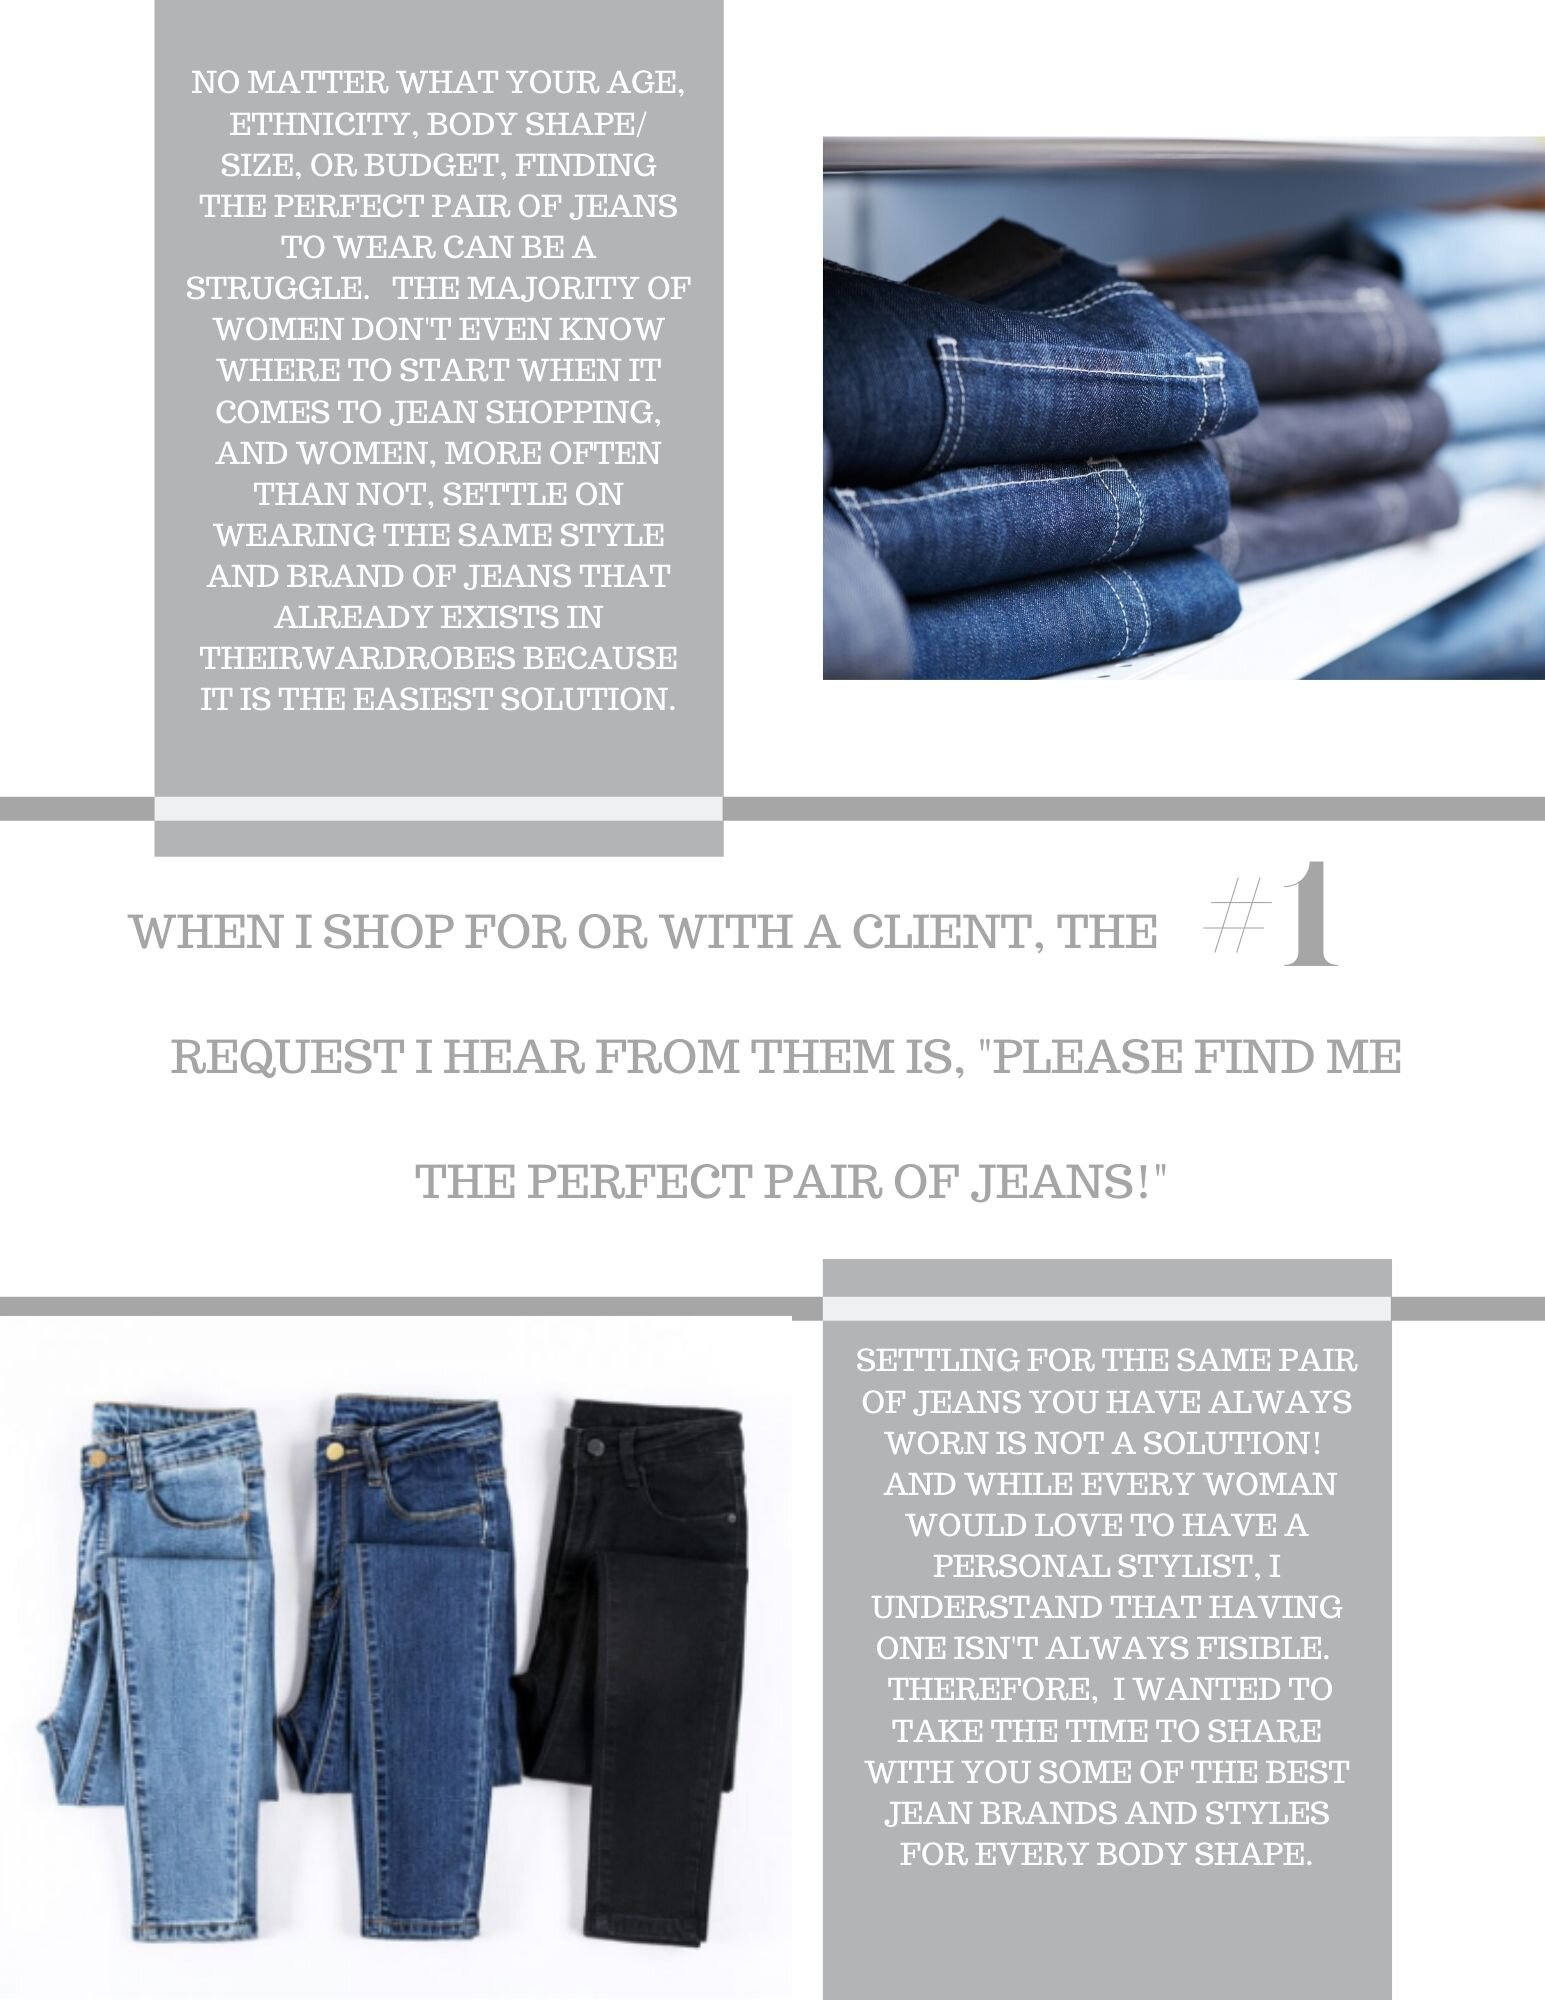 How To Buy The Perfect Pair Of Jeans For Your Body Type